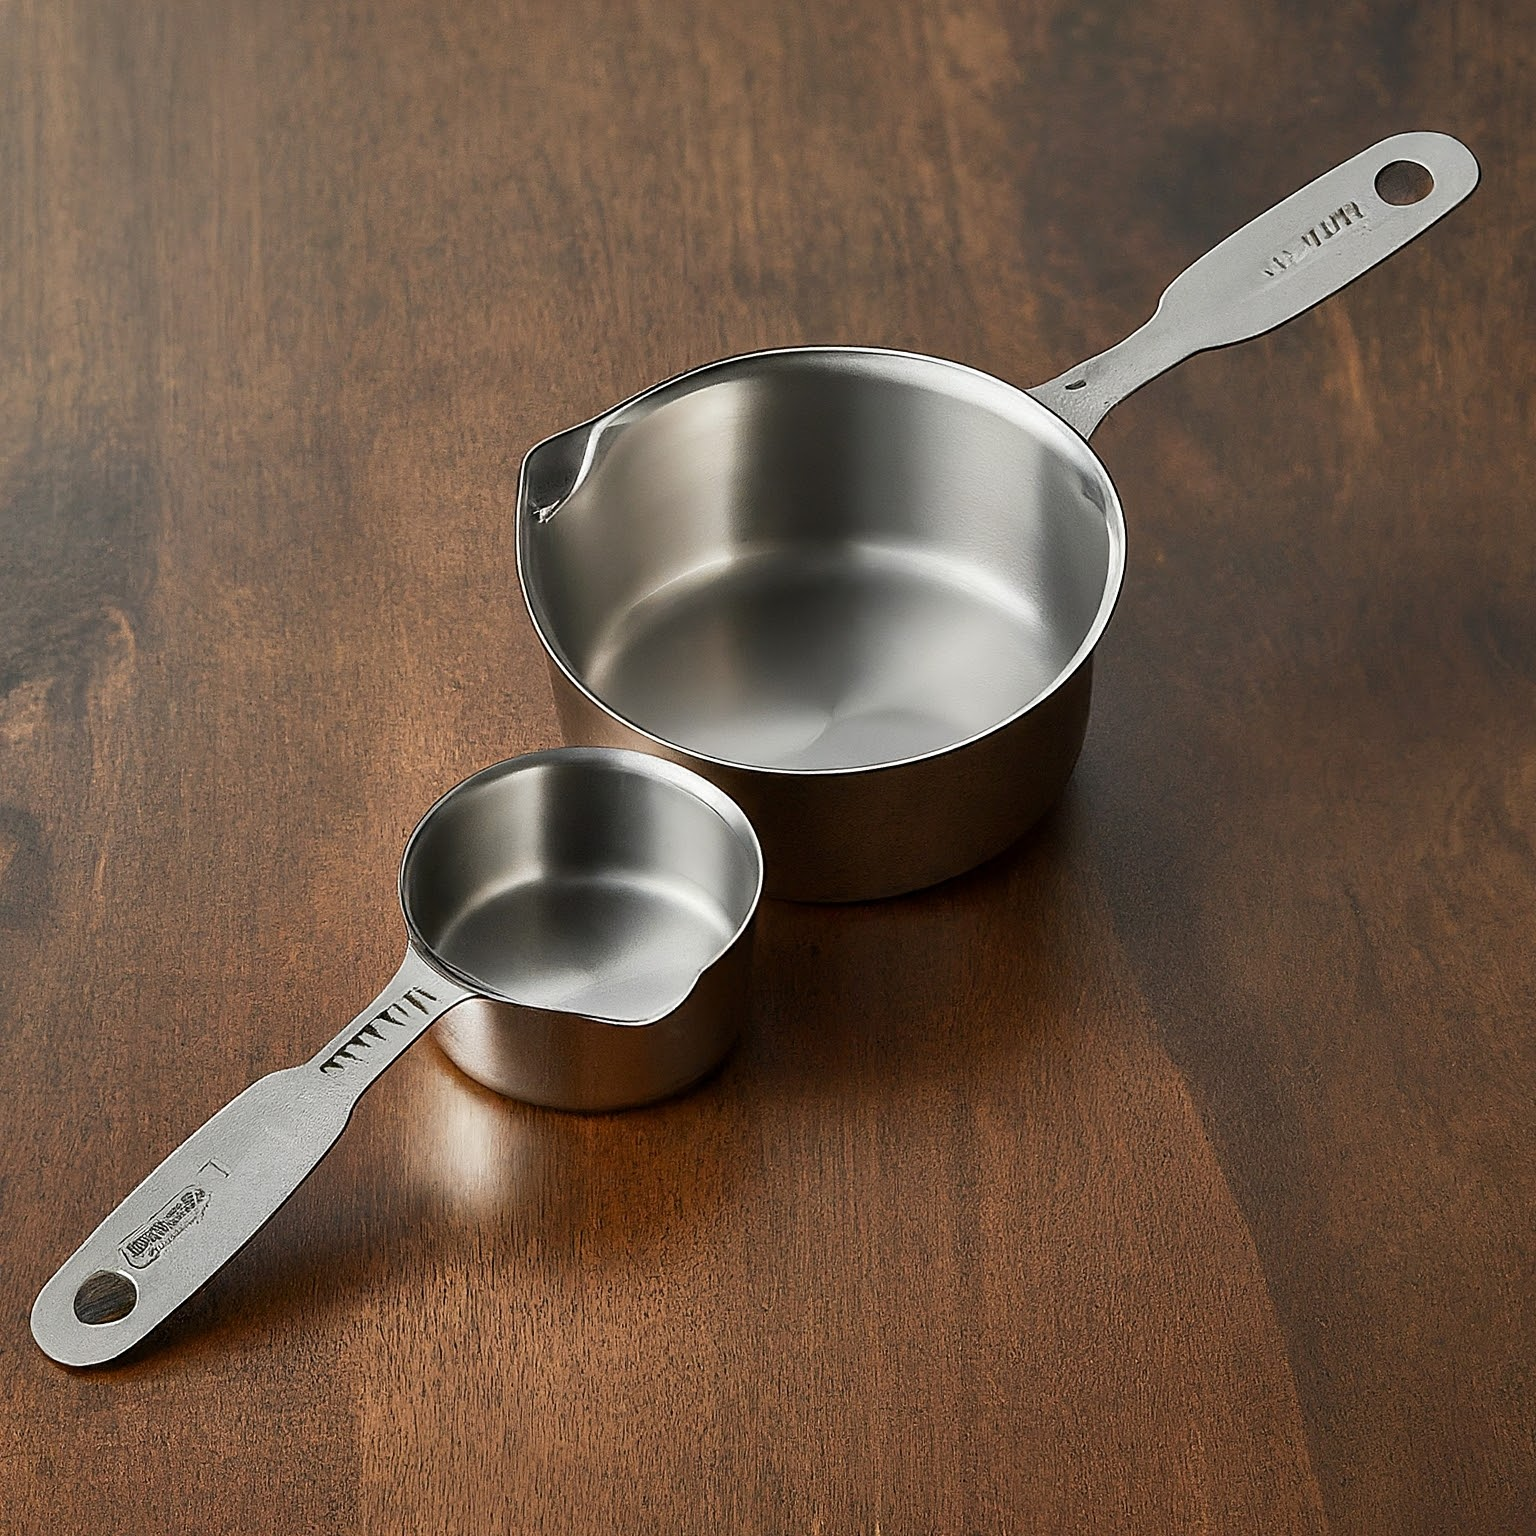 Stainless steel measuring cup sets for various measurement needs